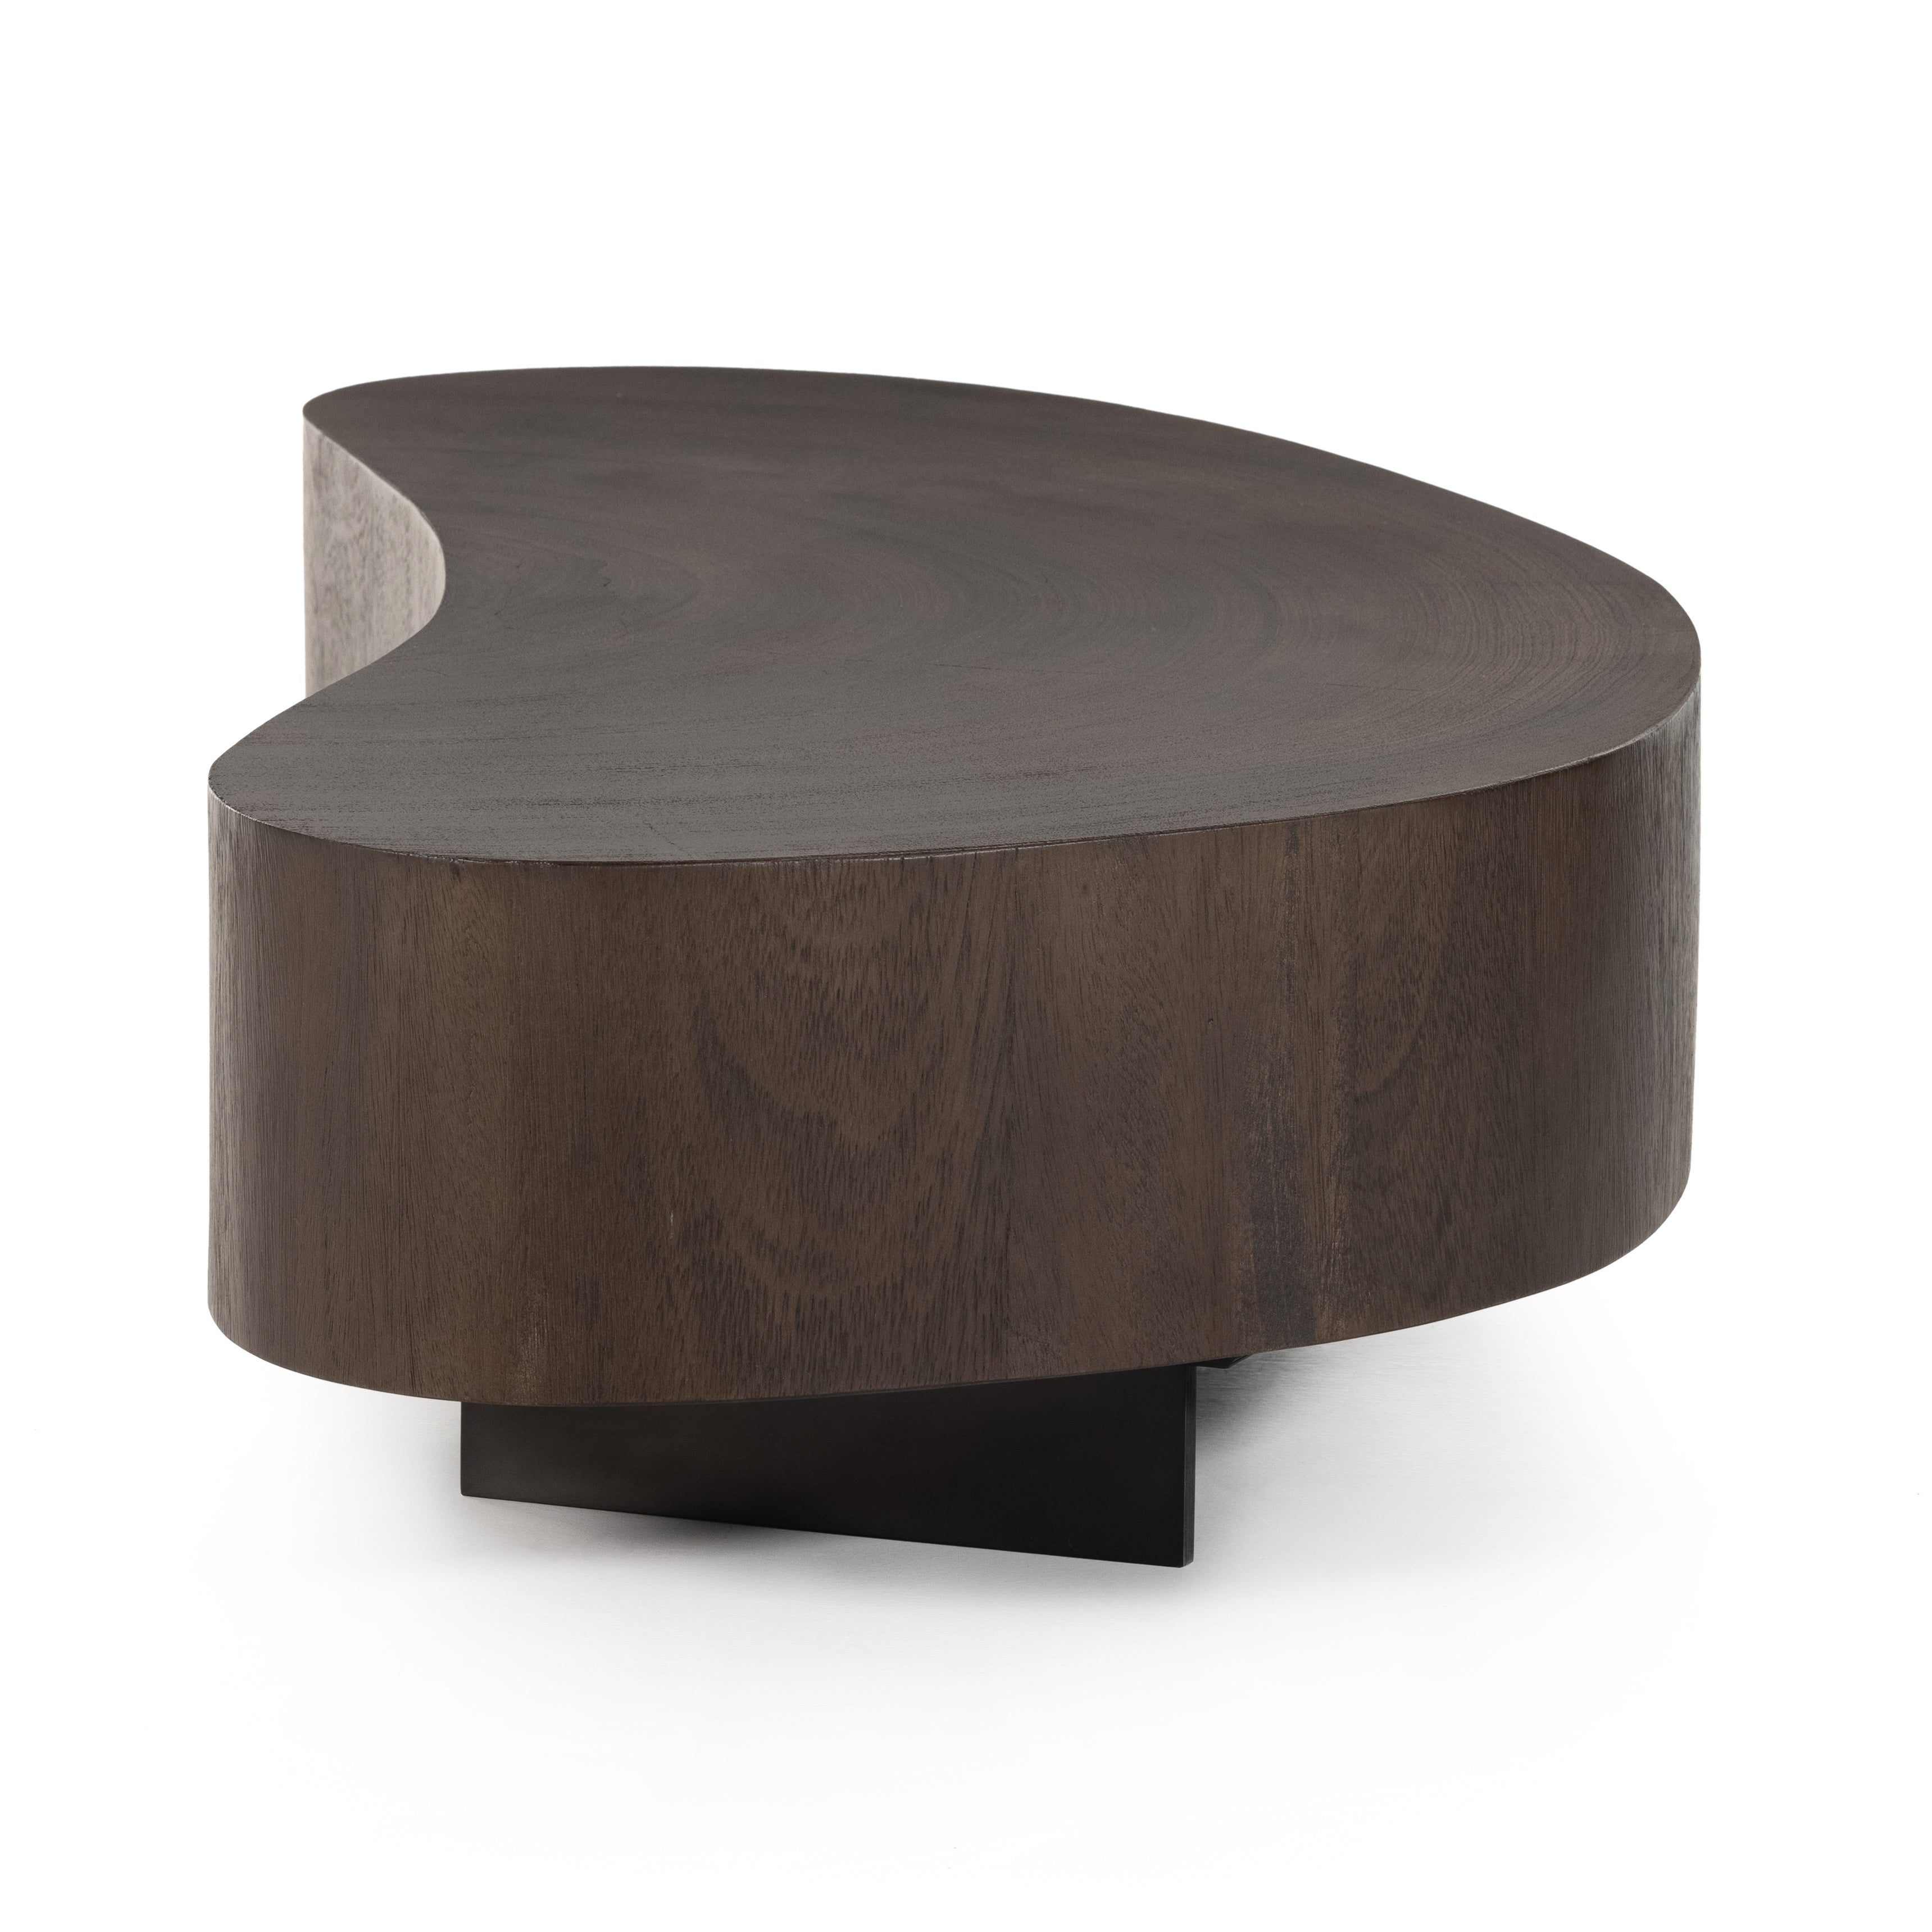 Natural beauty, total novelty. Oyster-cut Guanacaste forms a petite, kidney-shaped coffee table. Visible rings speak to woods' natural graining, while a dark gunmetal-finished base provides clean contrast to the whole look. Option to pair with taller piece, sold separately. Amethyst Home provides interior design, new construction, custom furniture, and area rugs in the San Diego metro area.